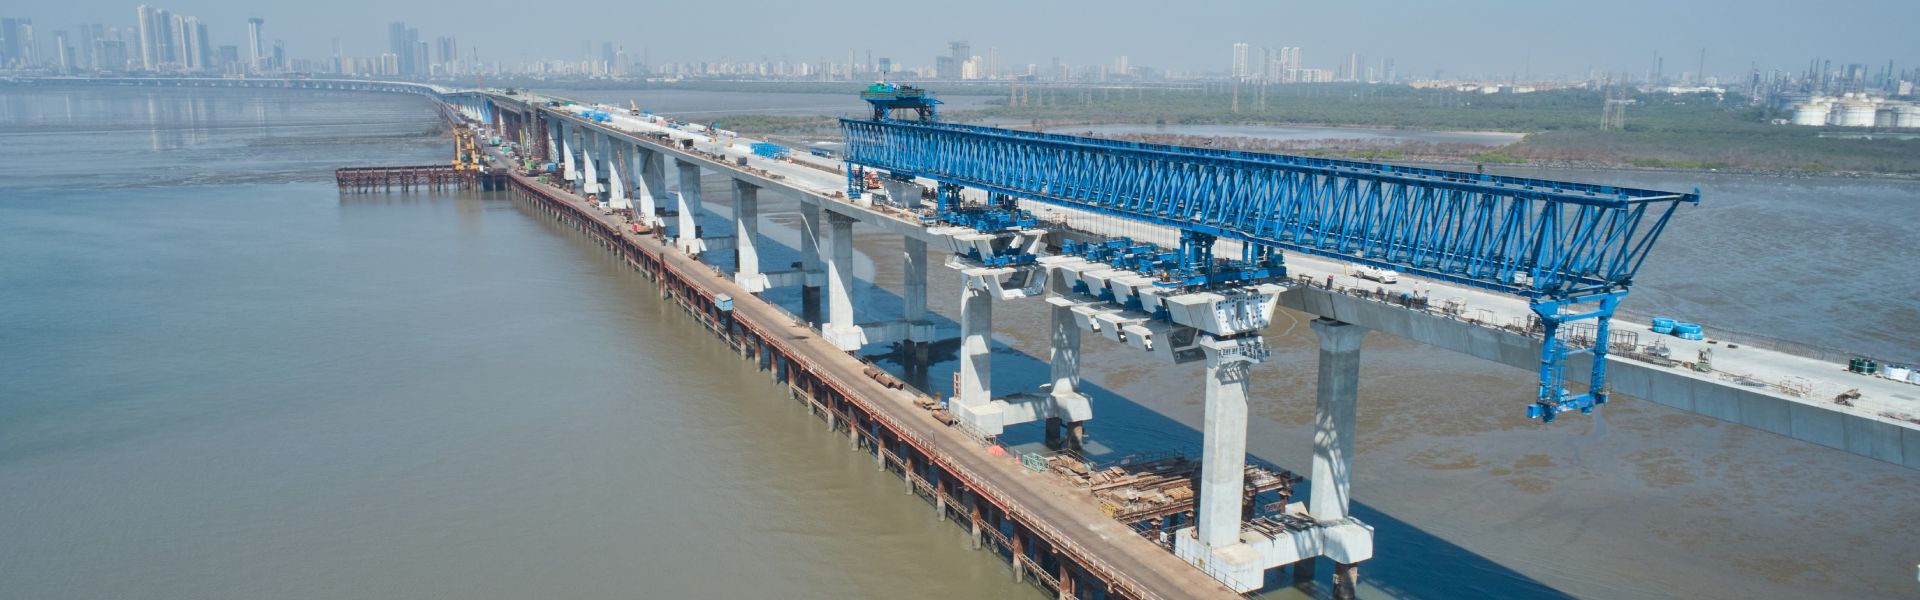 Get introduced to the engineering wonders of India’s longest sea bridge – the Mumbai Trans Harbour Link (MTHL)